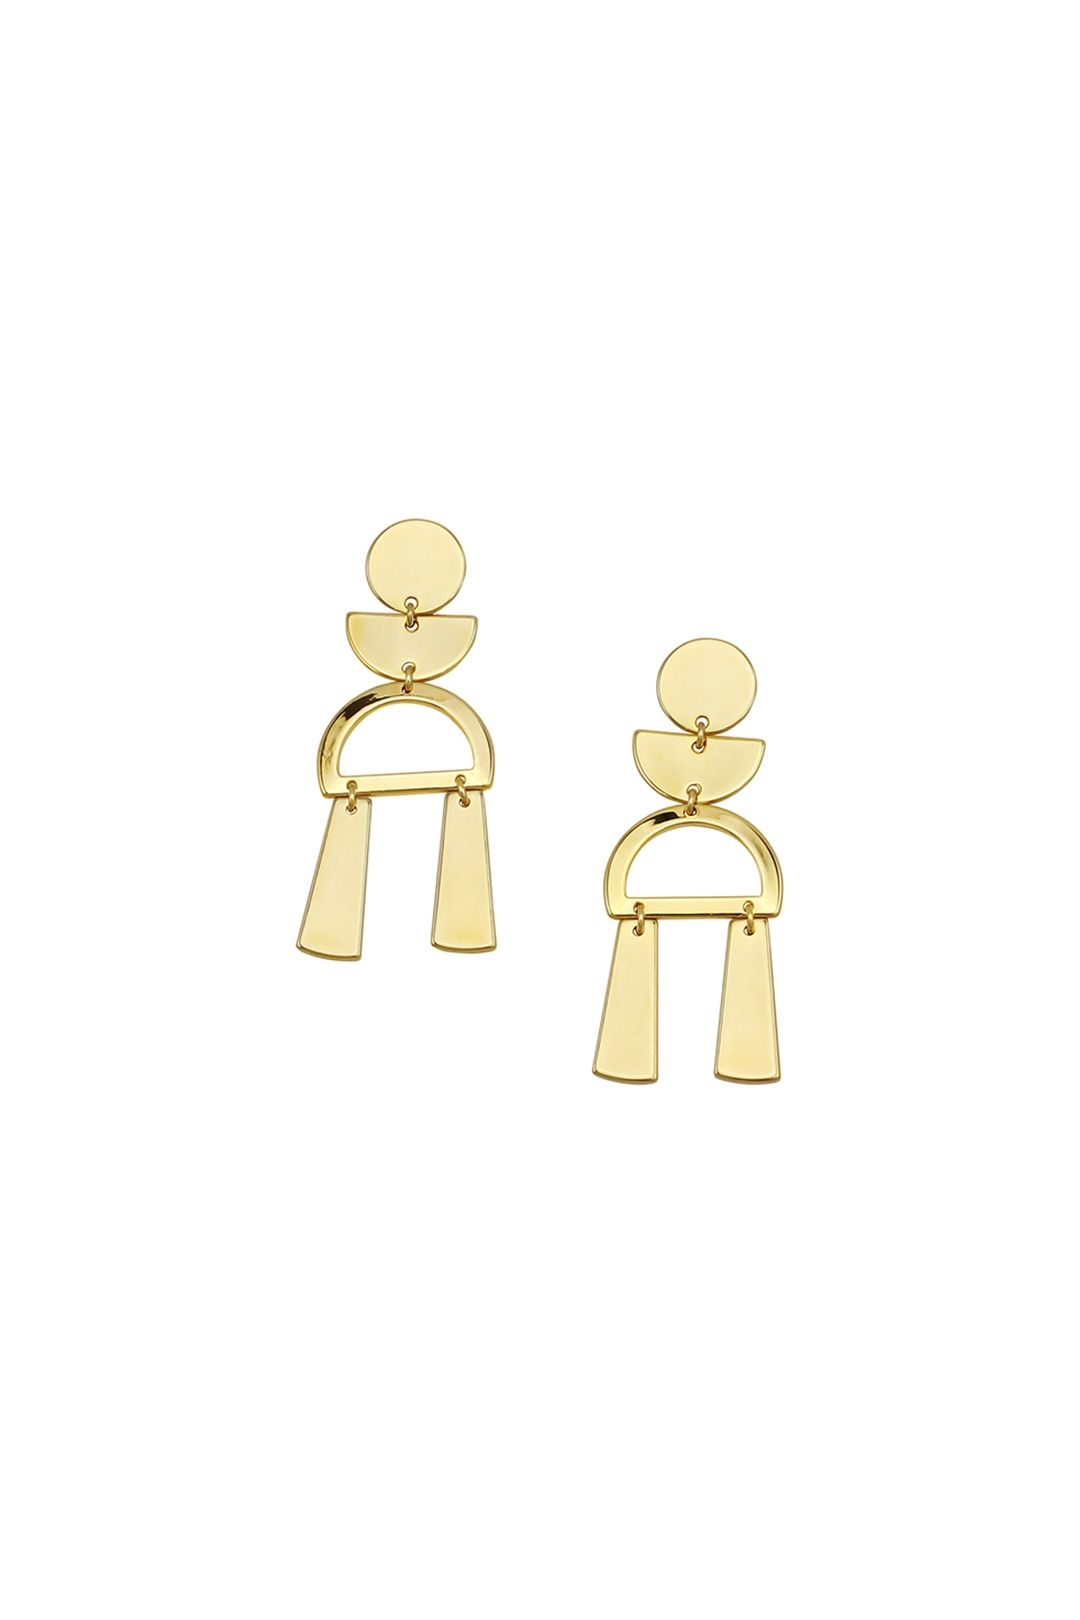 Jolie and Deen - Selma Earrings - Gold - Ghost Front